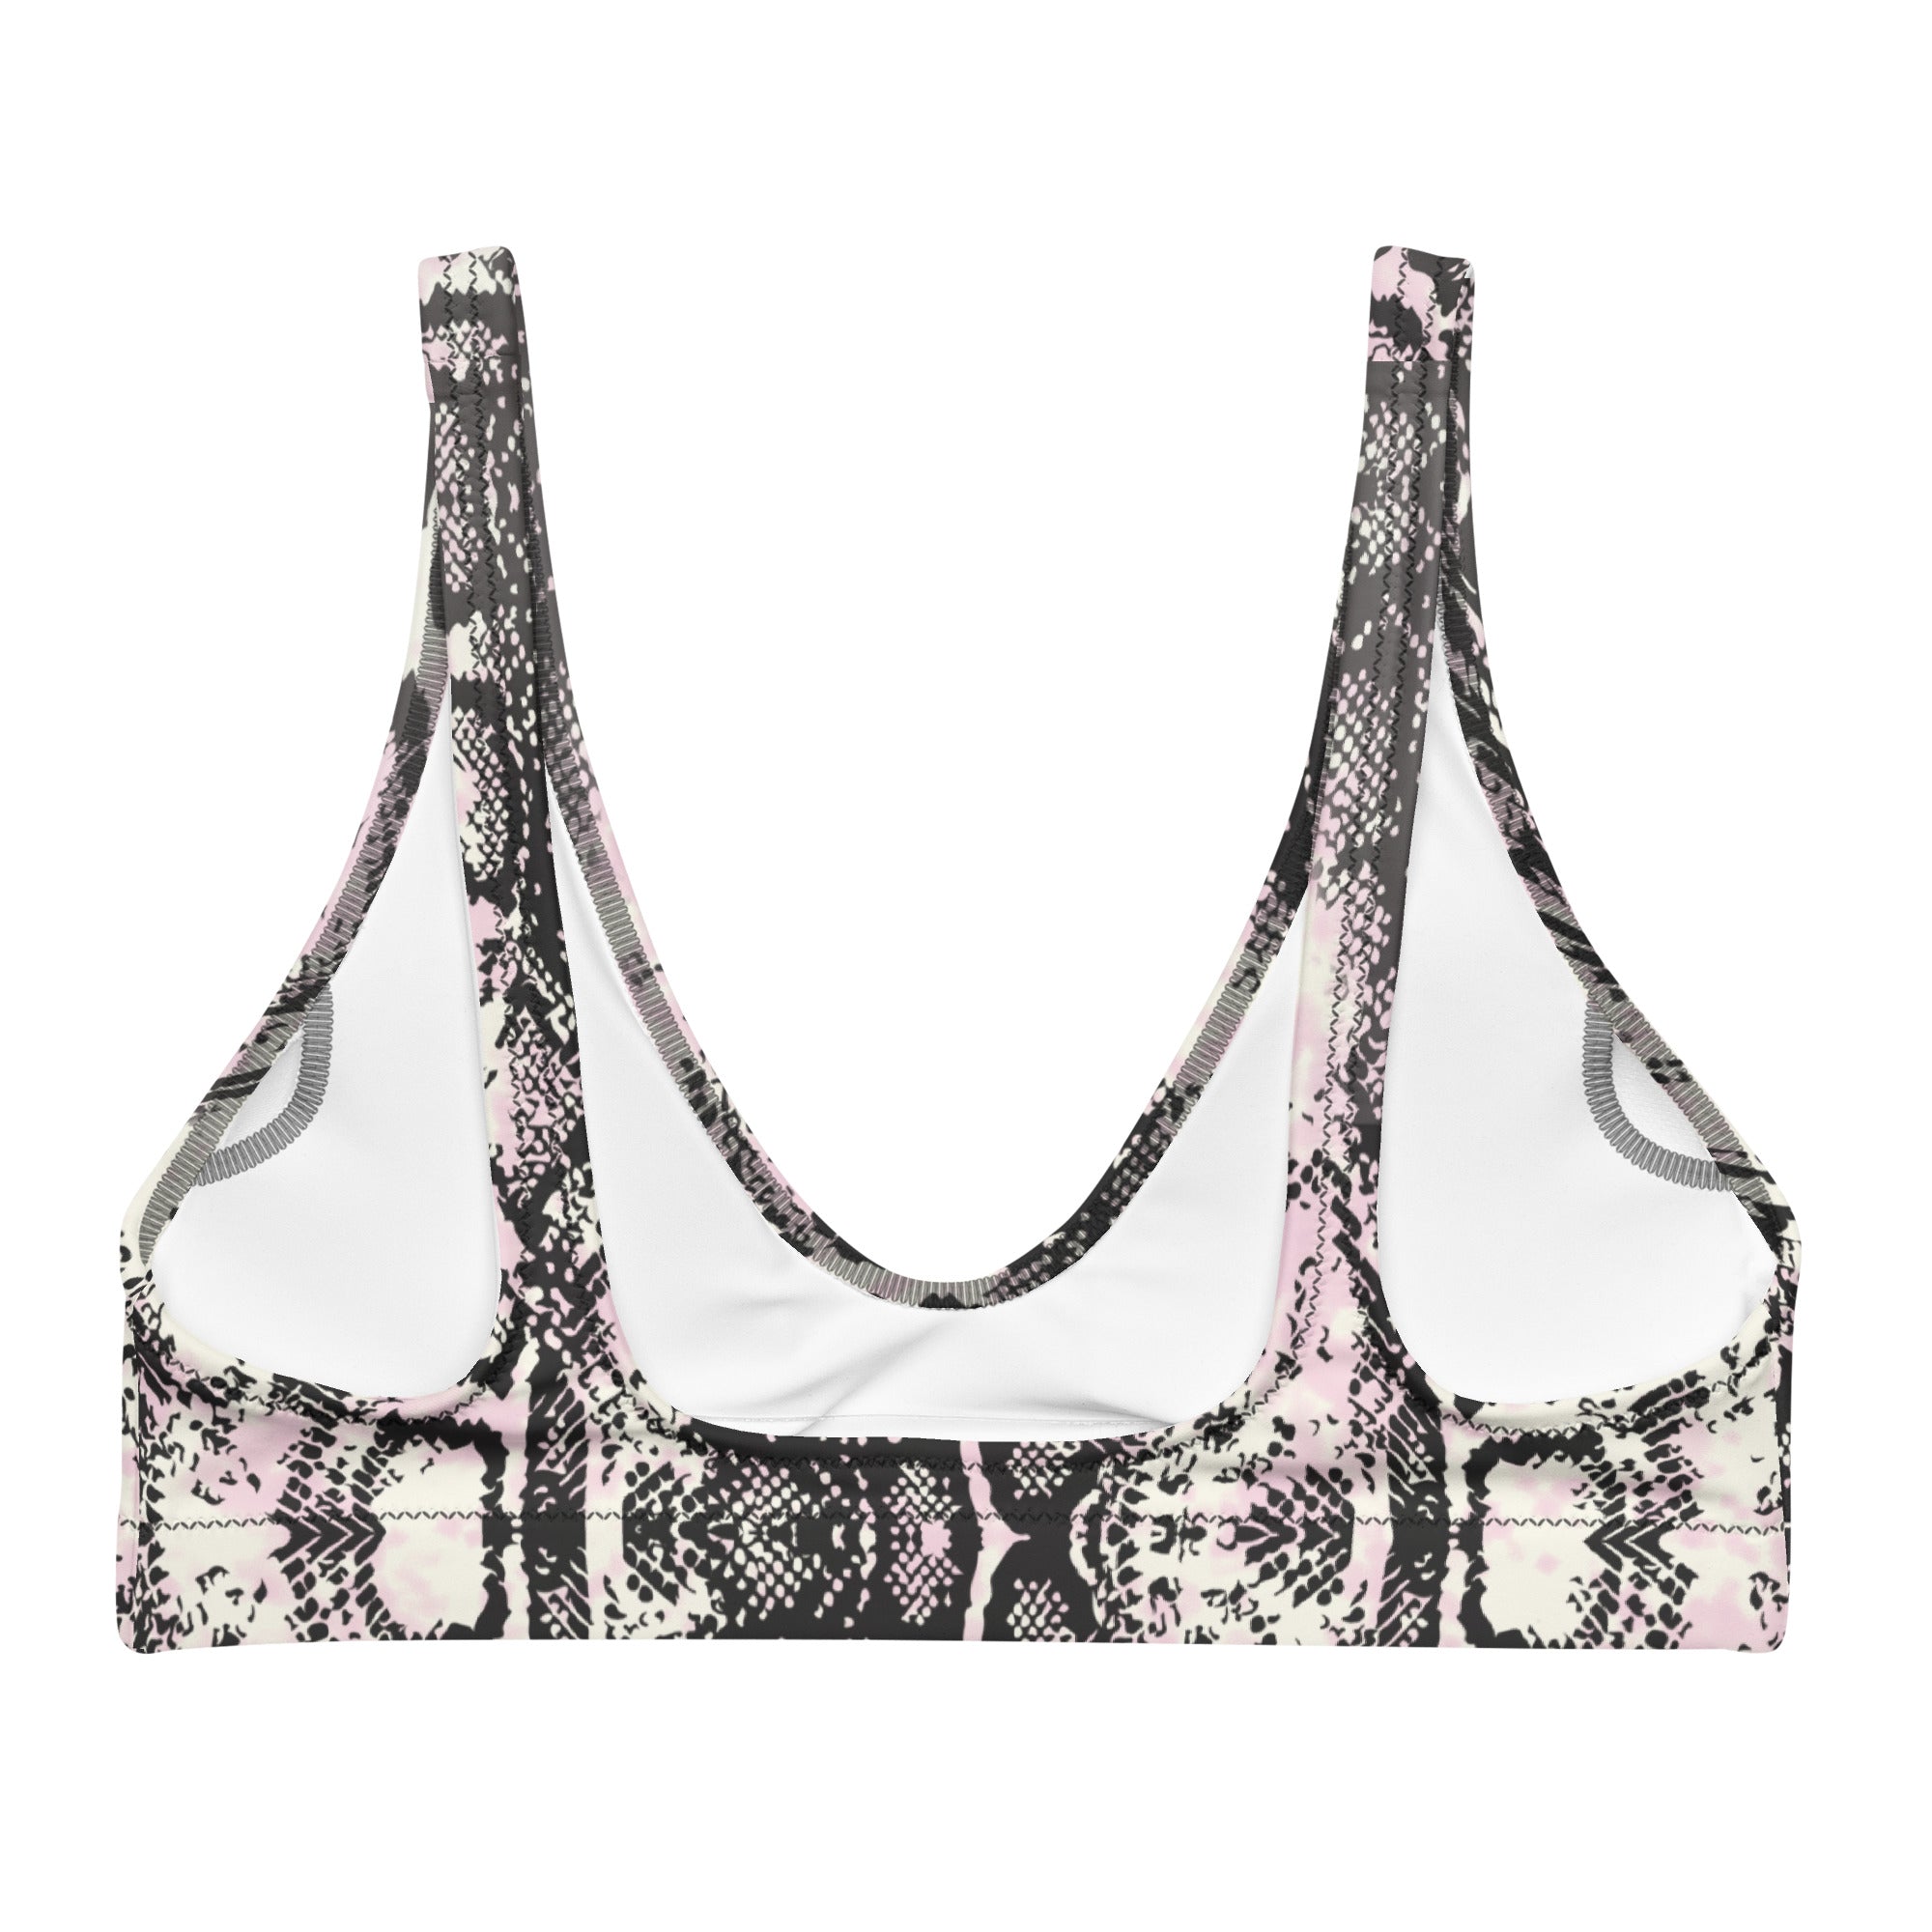 With its adjustable straps and soft, breathable fabric, this bra is ideal for everyday wear or special occasions, adding a touch of daring sophistication to any outfit. 